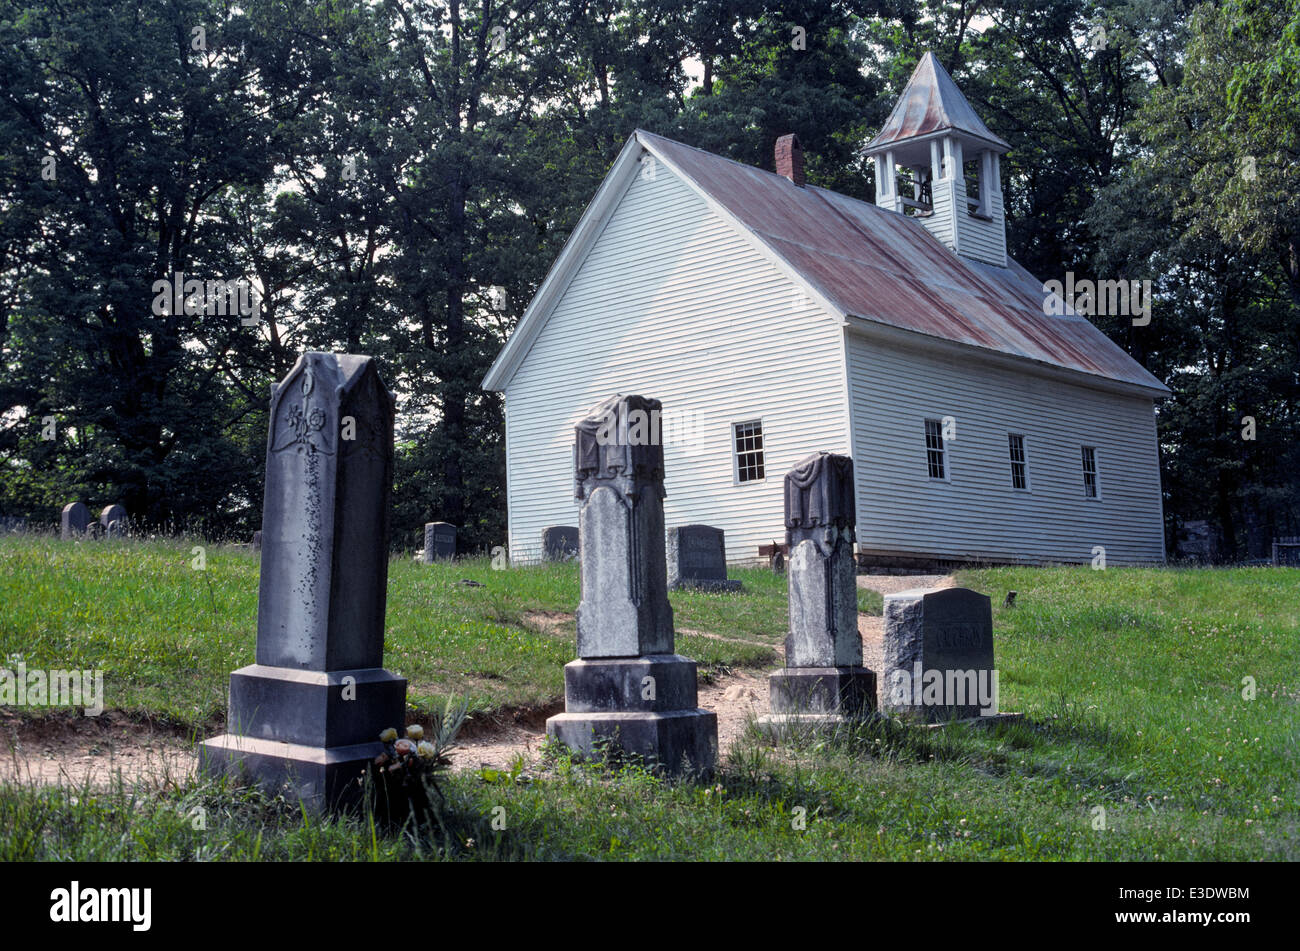 The 1887 Primitive Baptist Church and its old graveyard are now part of Great Smoky Mountain National Park in scenic Cades Cove, Tennessee, USA. Stock Photo